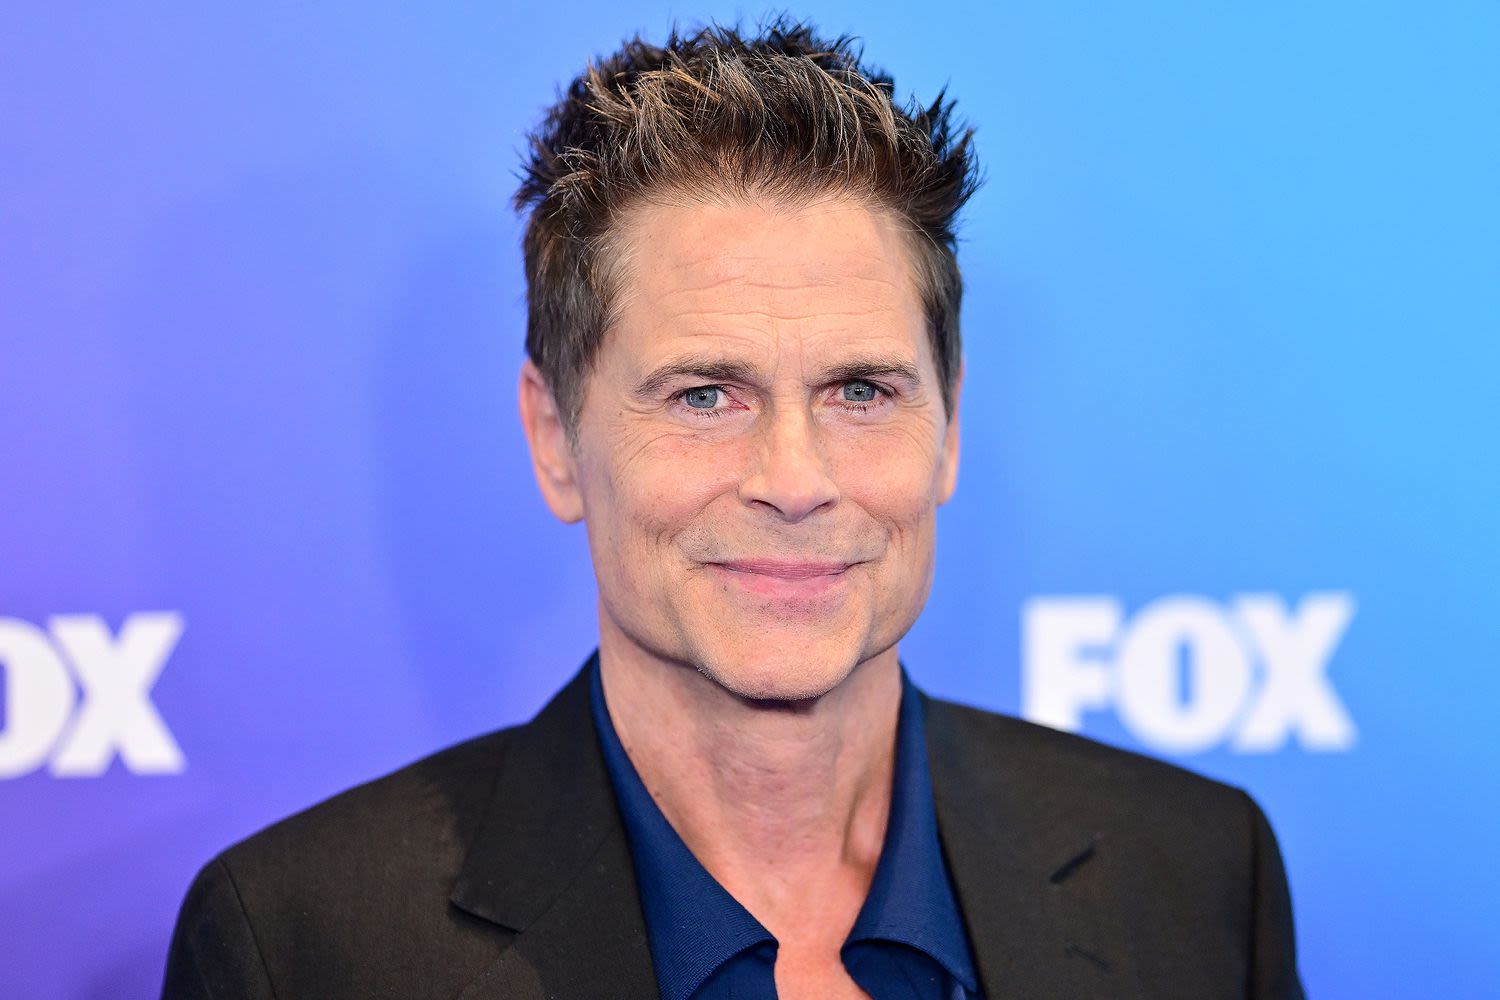 Rob Lowe Checks Out 'The Outsiders' Broadway Show 41 Years After the Movie: 'OG Outsider'